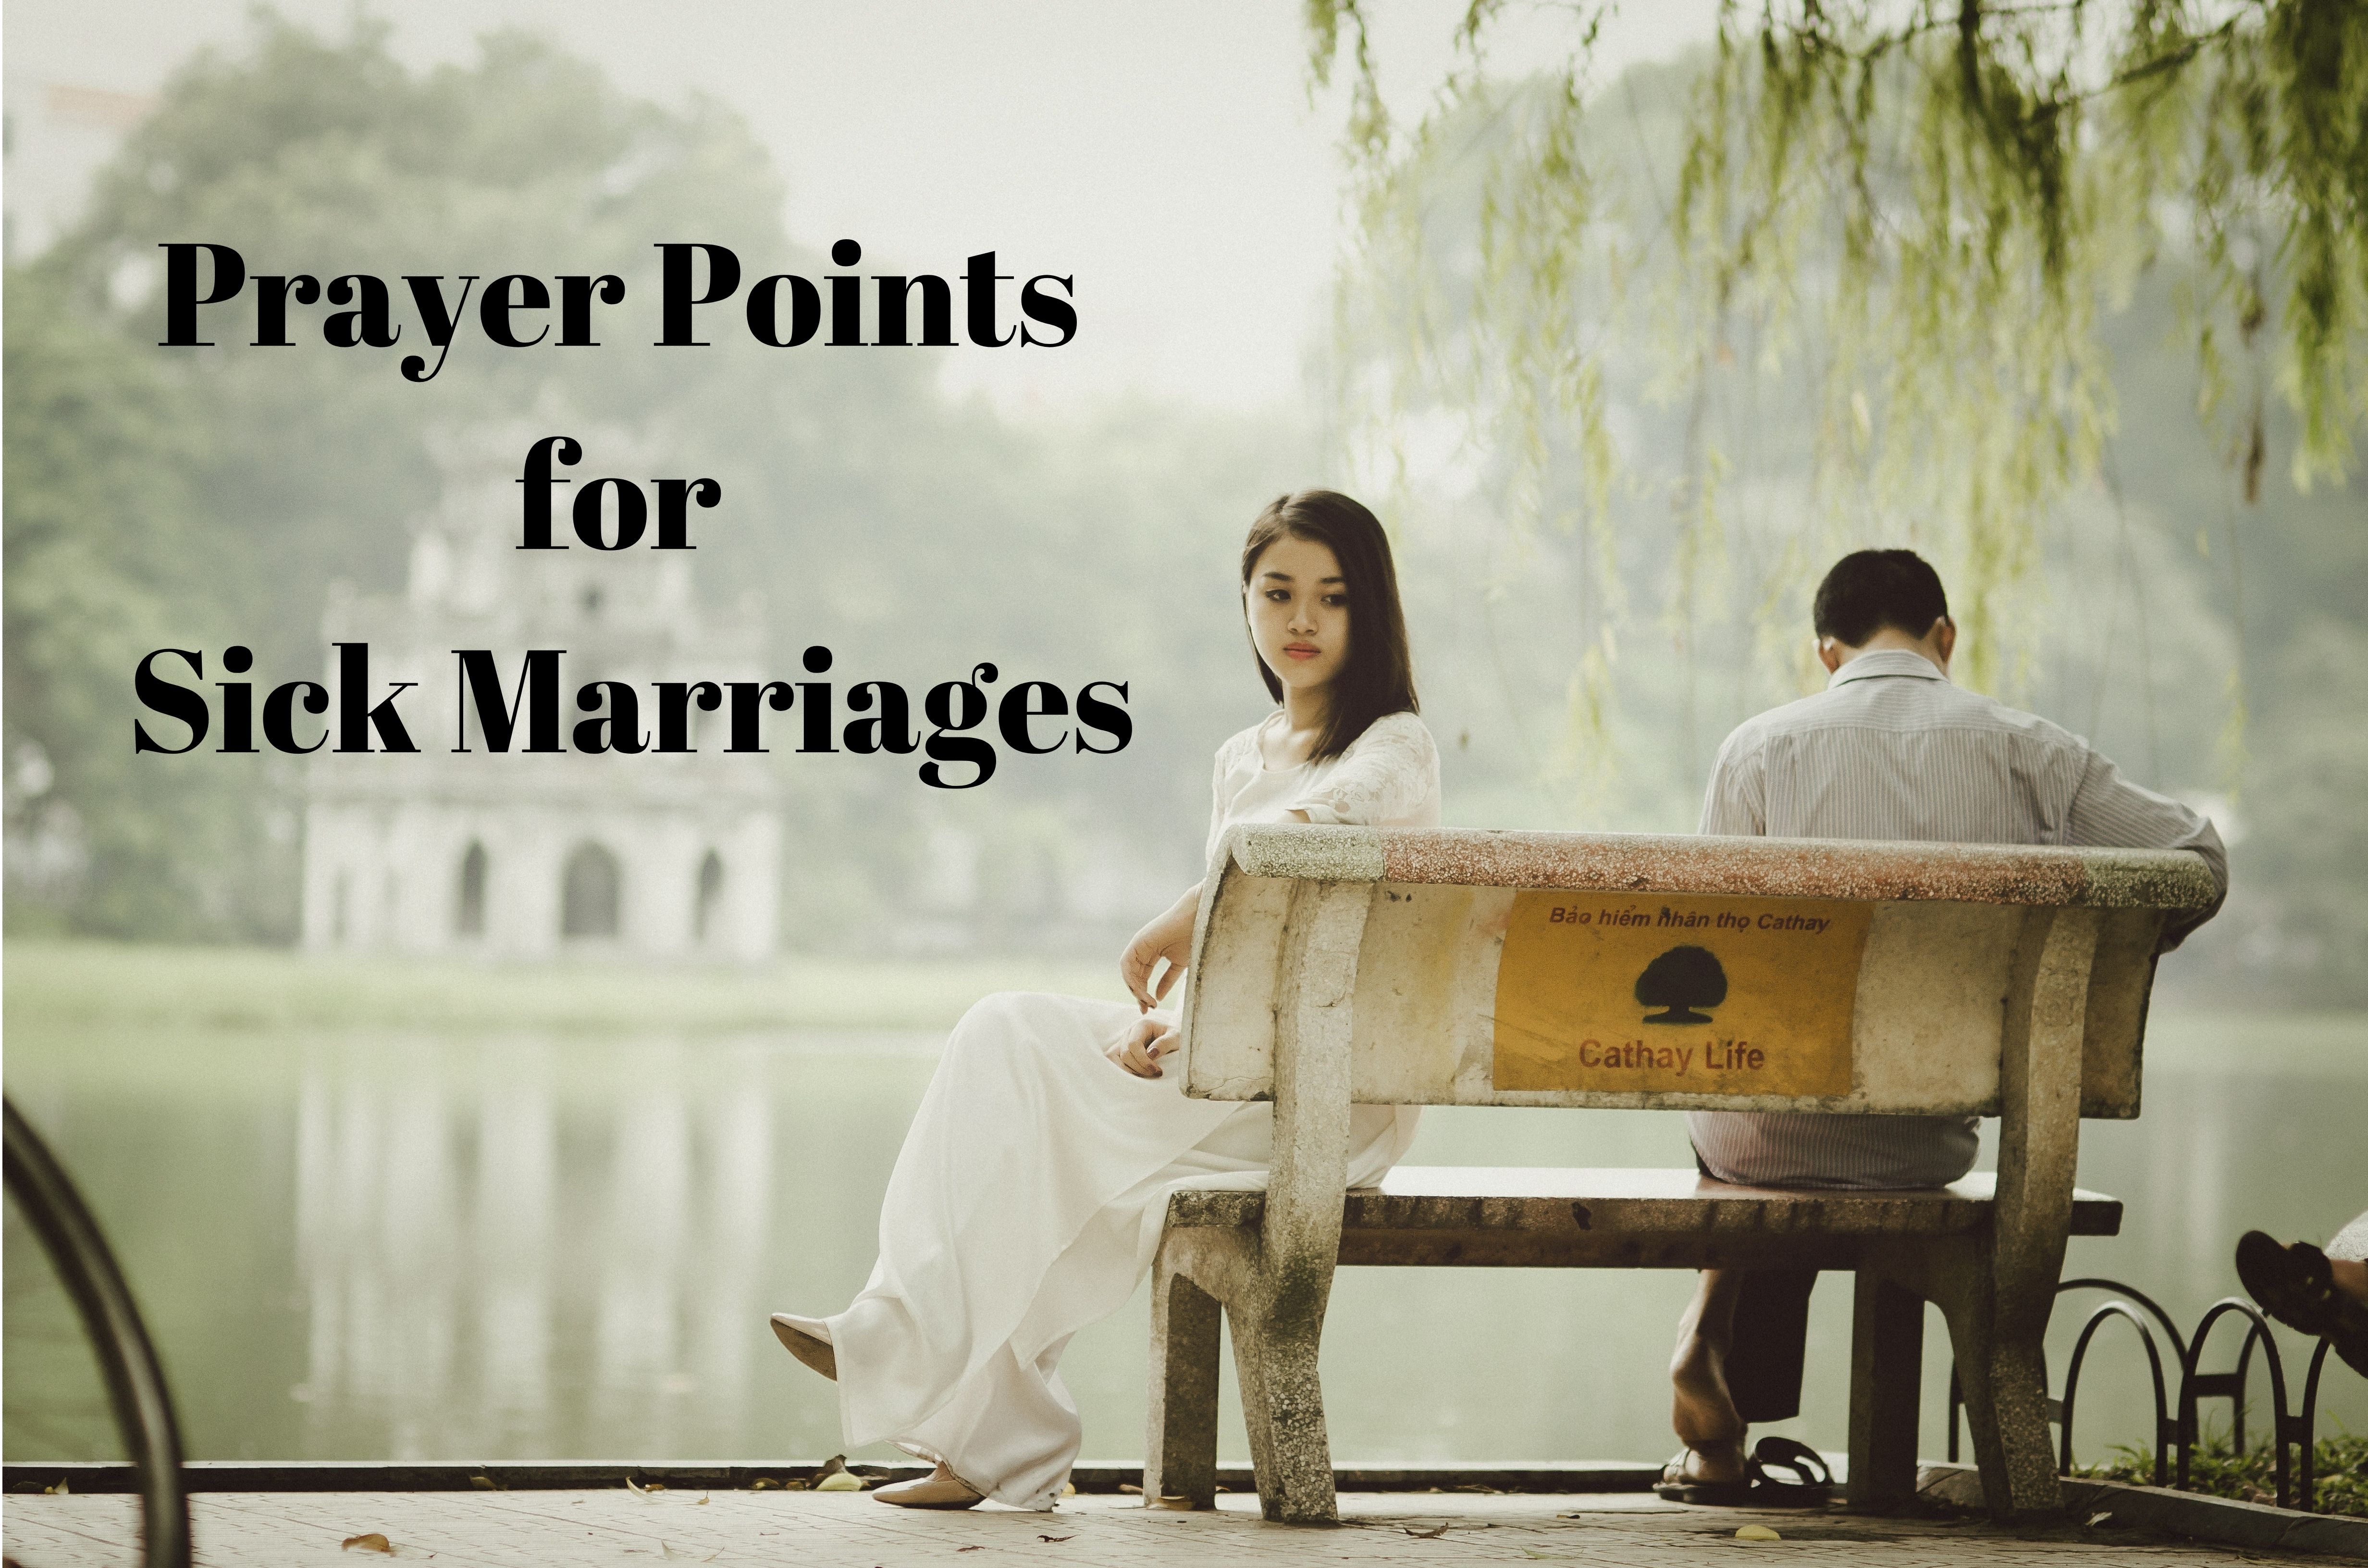 Prayer Points for Sick Marriages.jpg